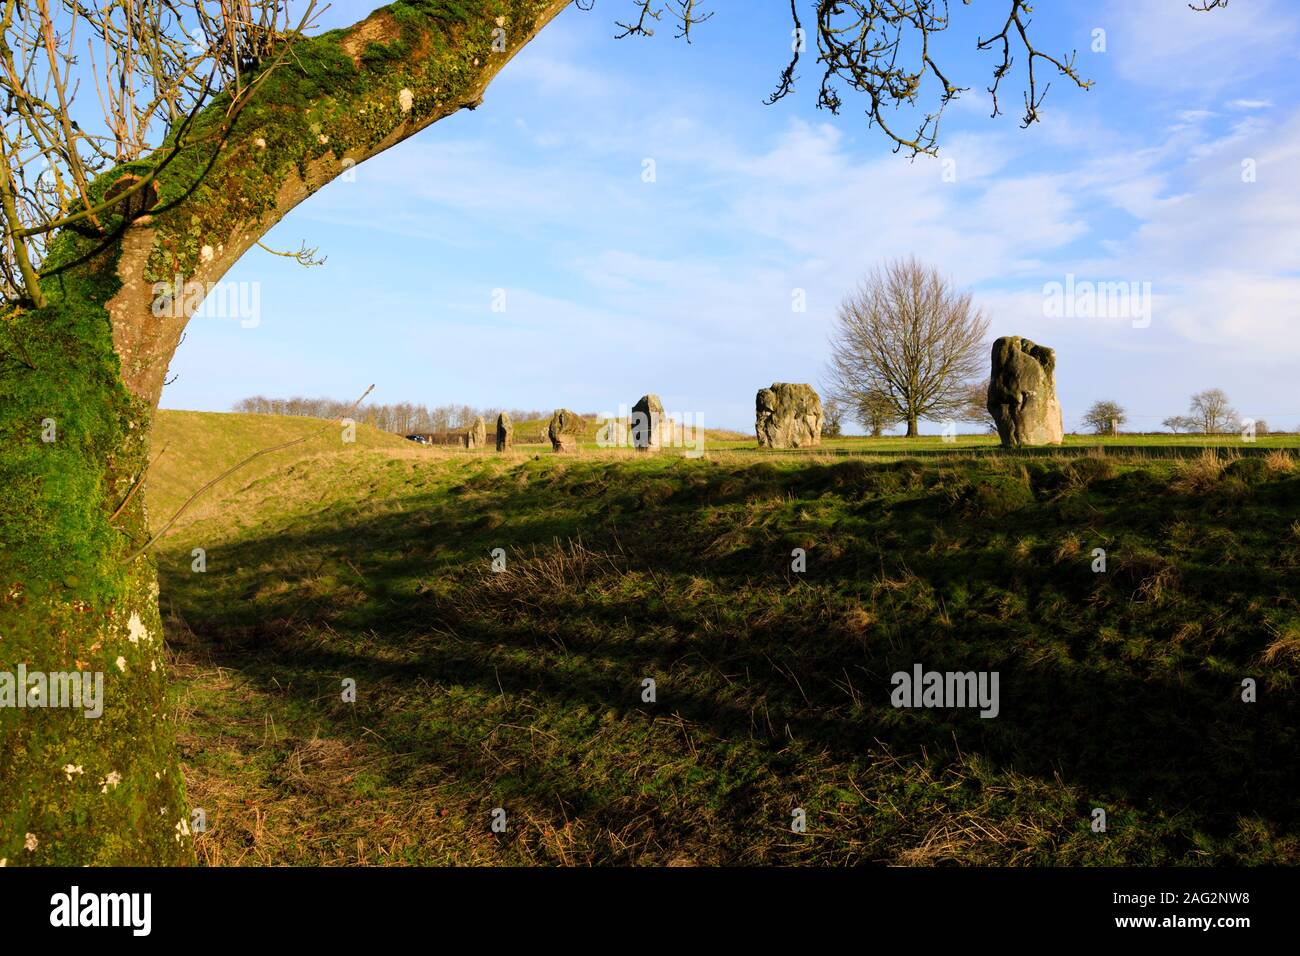 The Wiltshire village of Avebury, famous for its Neolithic standing stone circle. Stock Photo